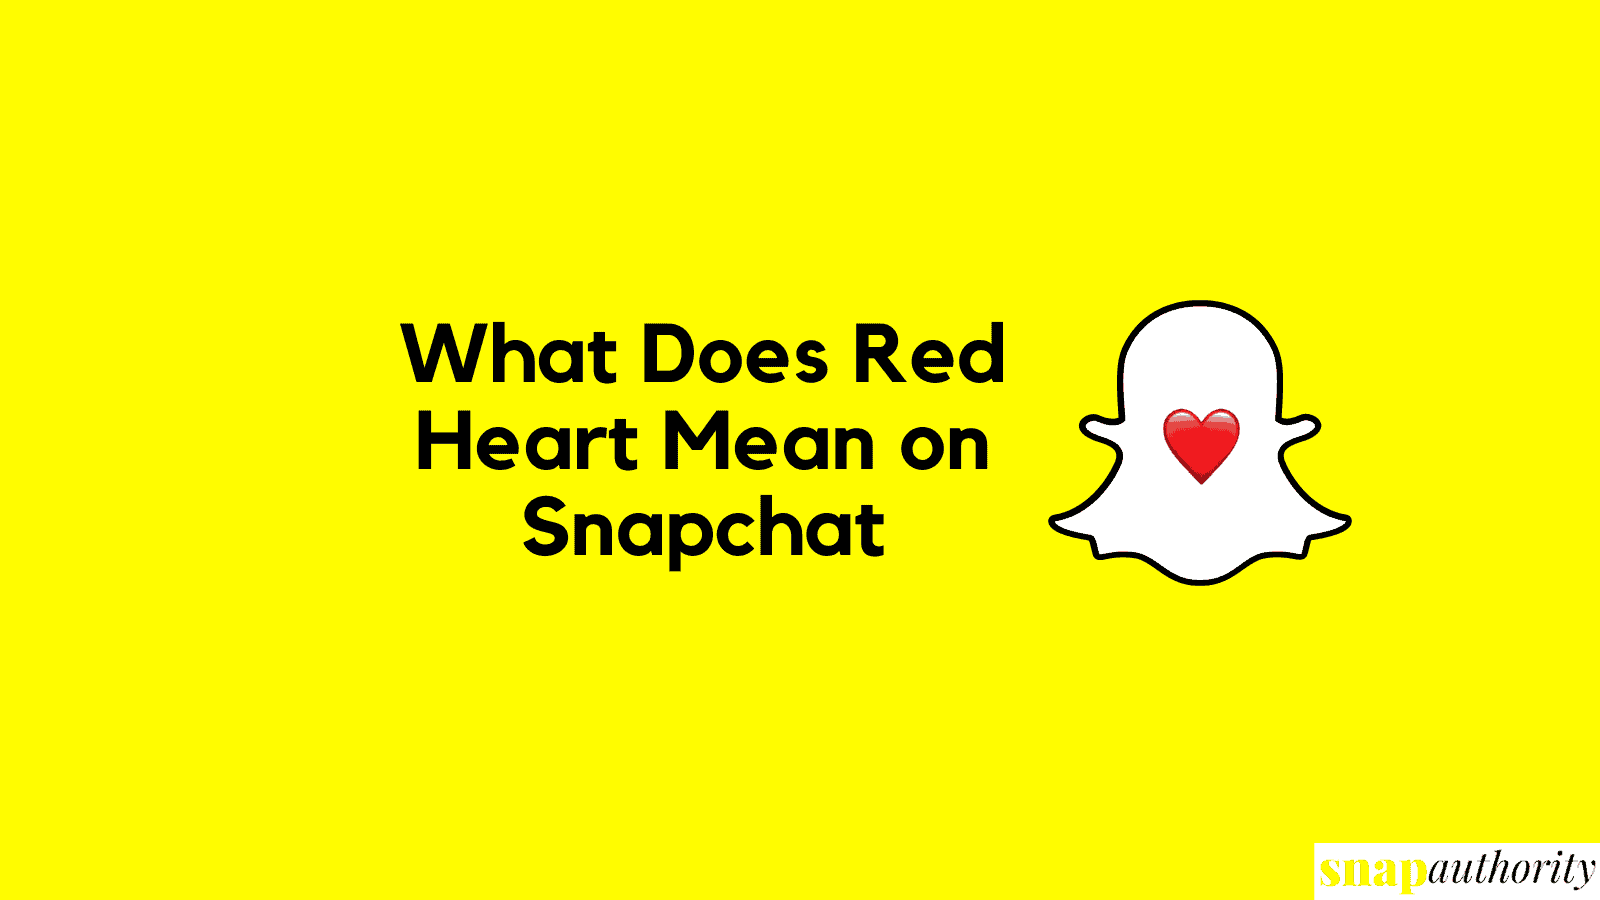 What does red heart mean on Snapchat